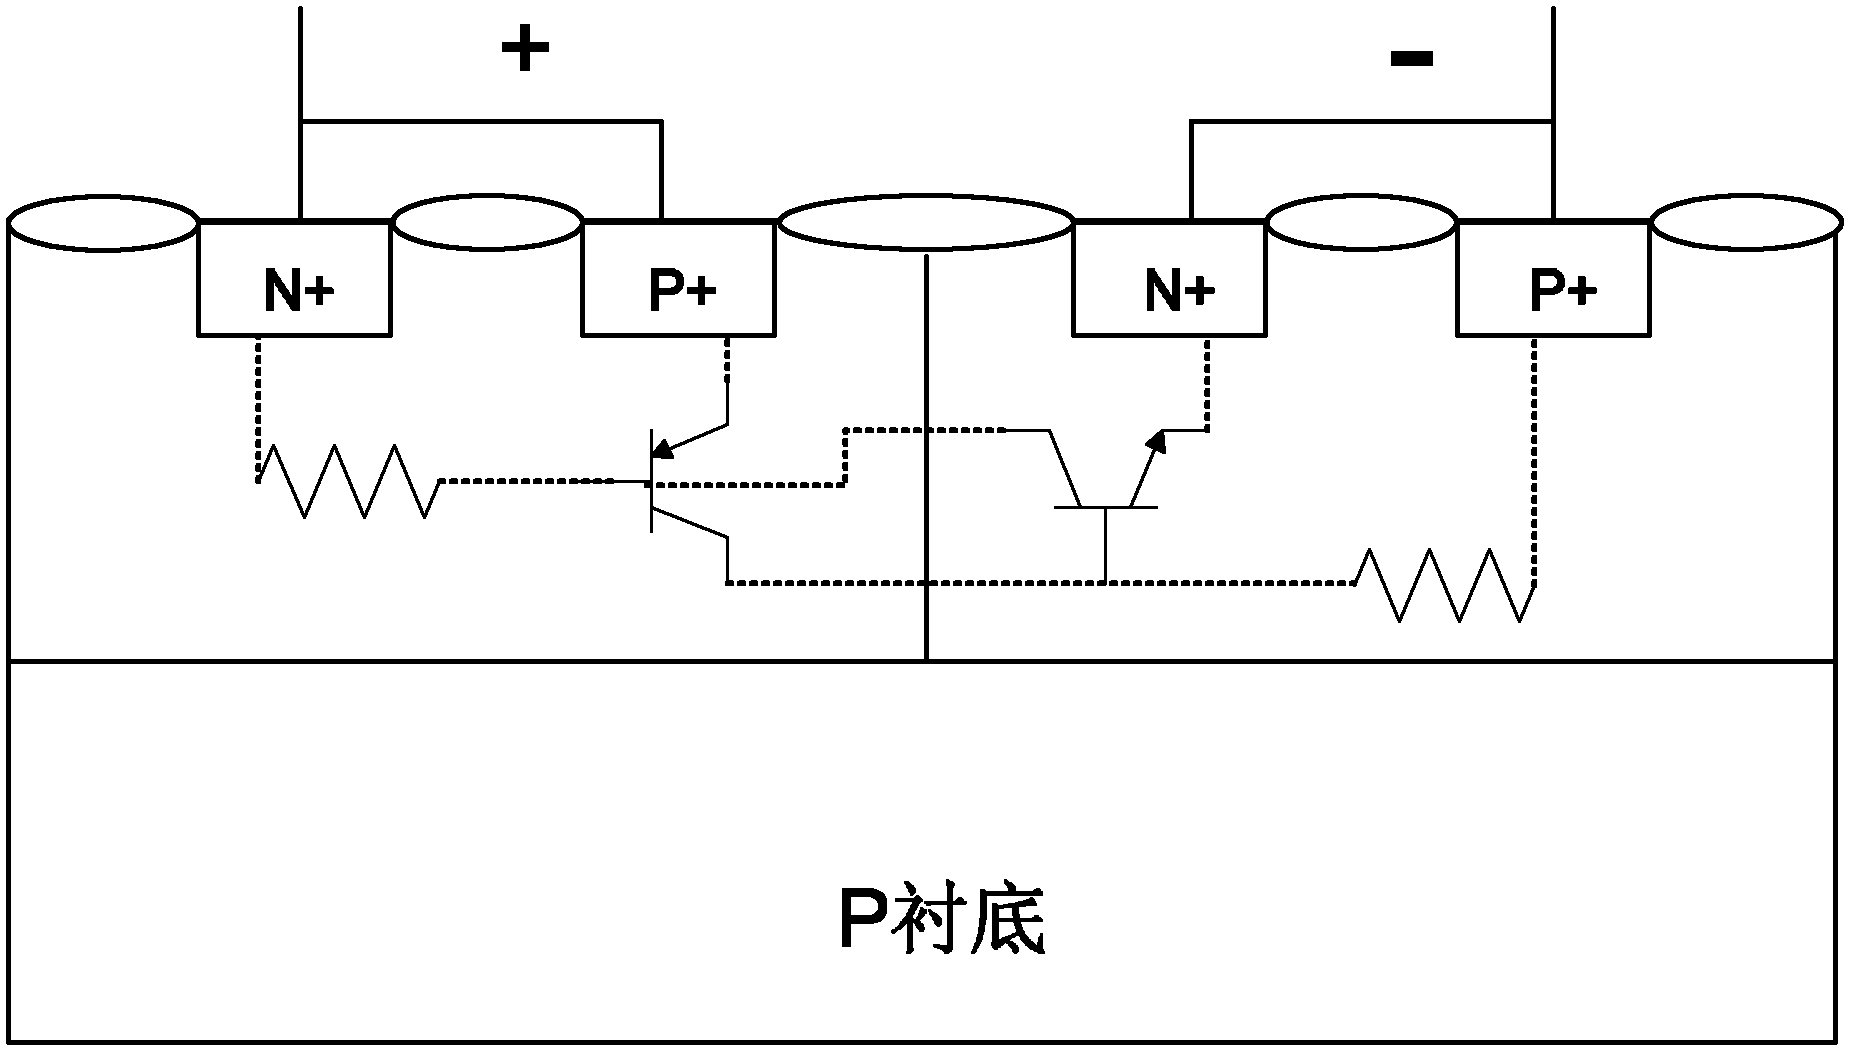 Bidirectional triode thyristor based on diode auxiliary triggering